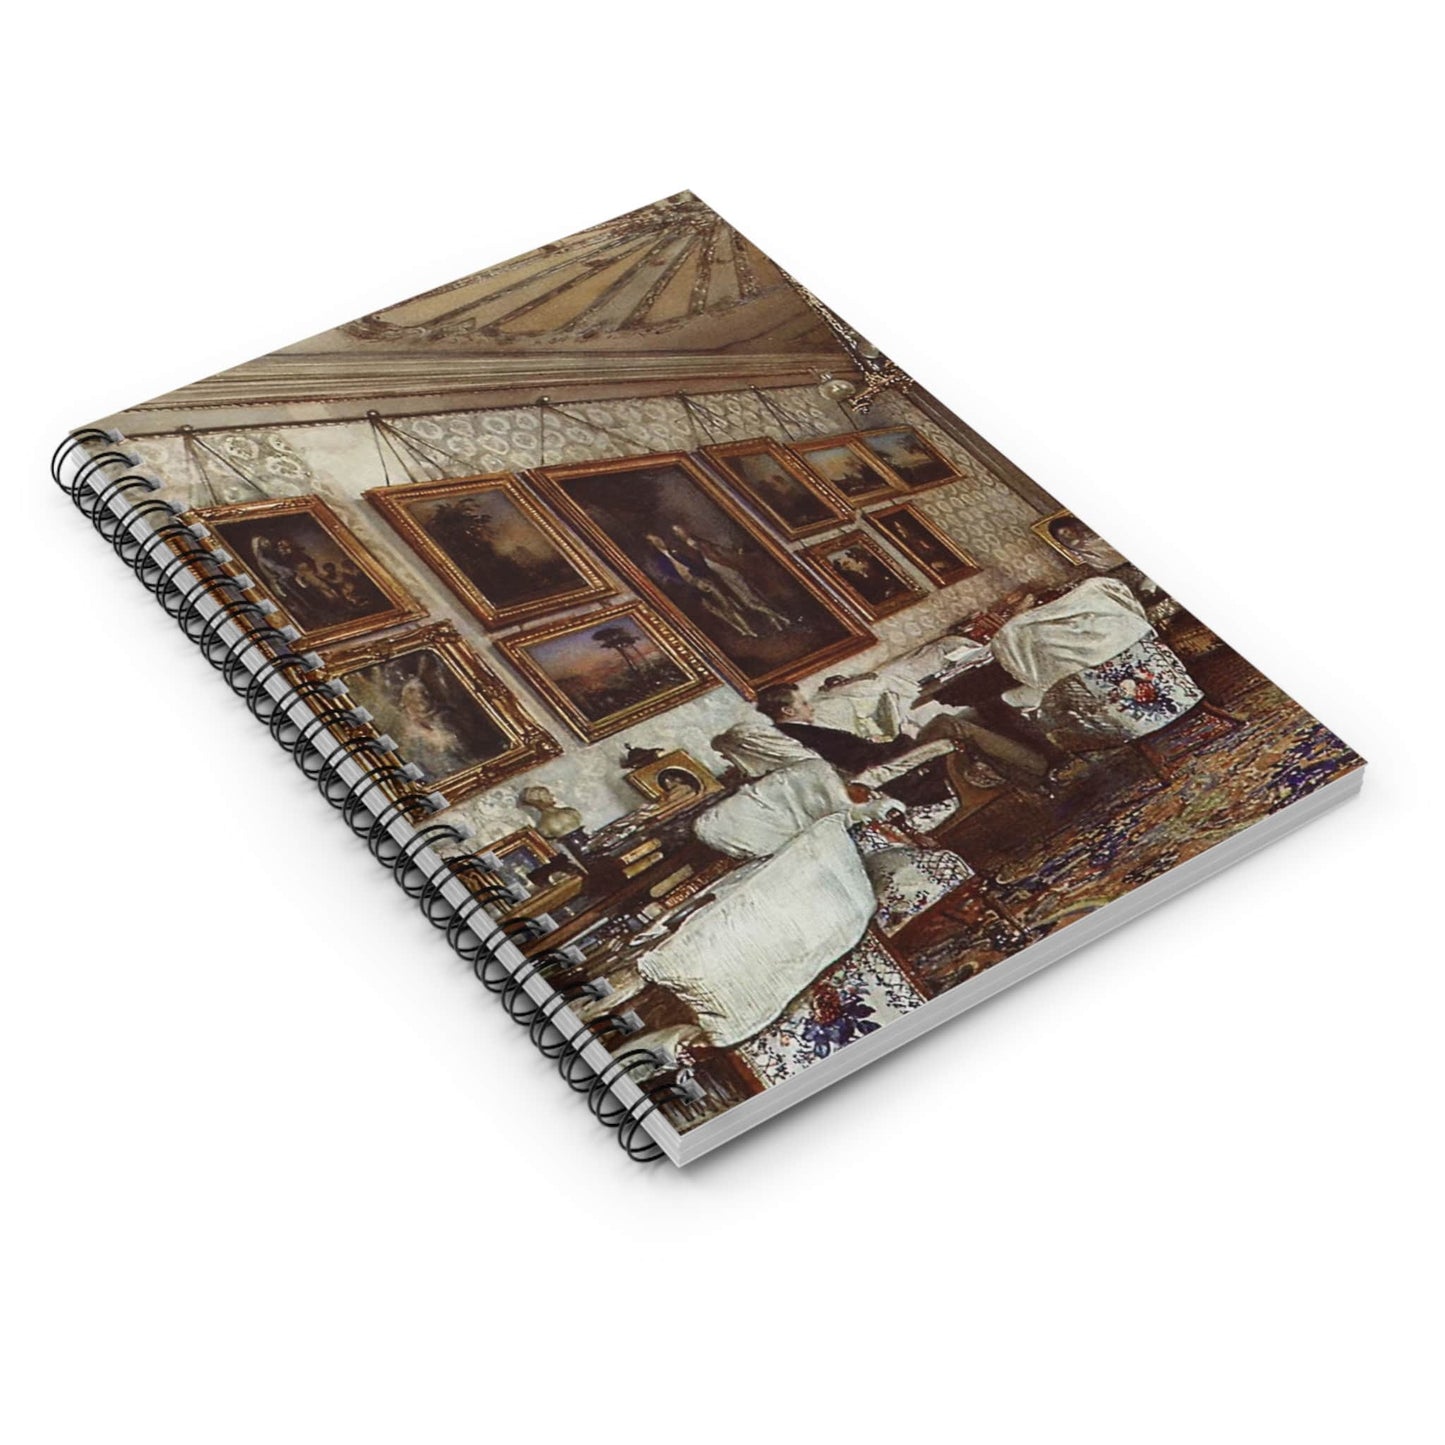 Antique Painting Spiral Notebook Laying Flat on White Surface